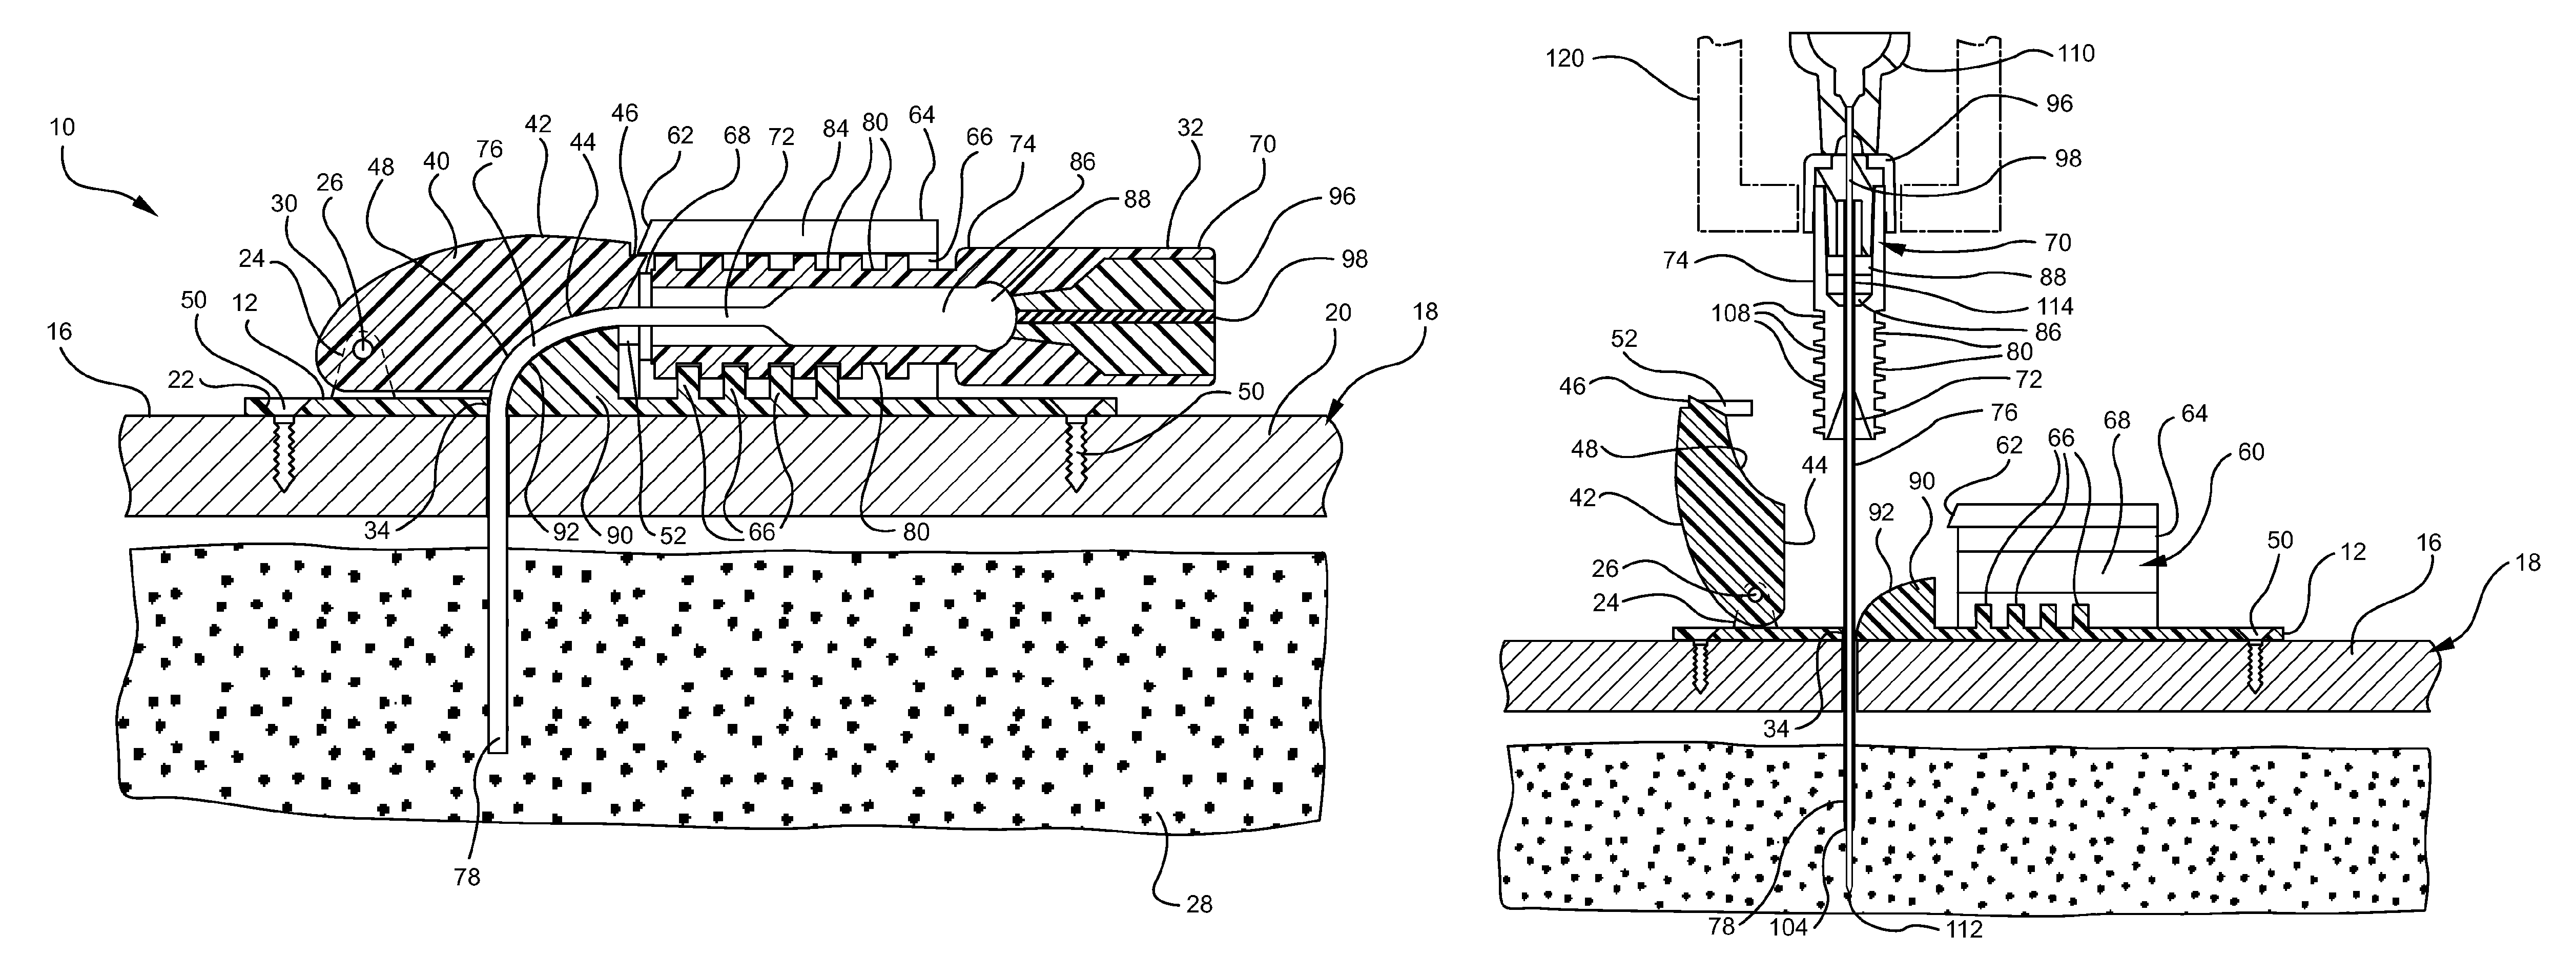 Systems and methods for providing a convection-enhanced delivery device